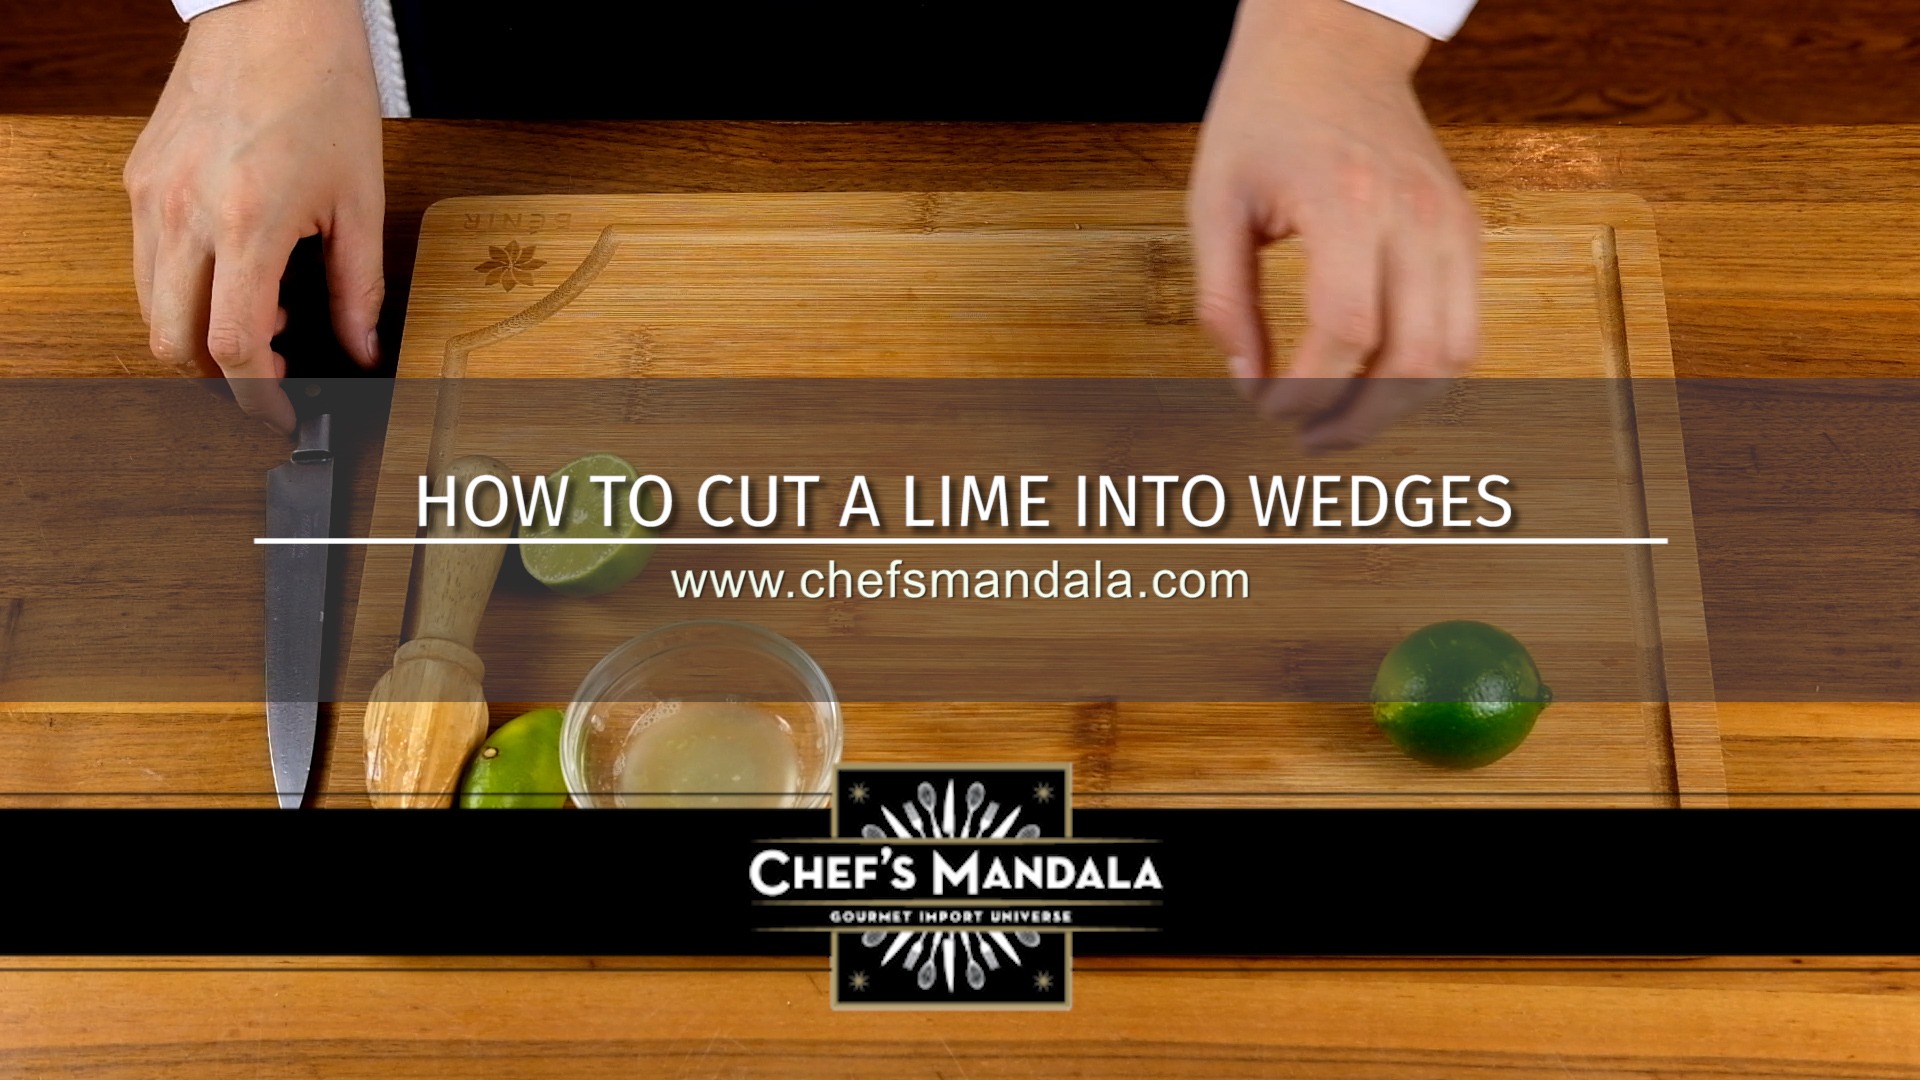 HOW TO CUT A LIME INTO WEDGES